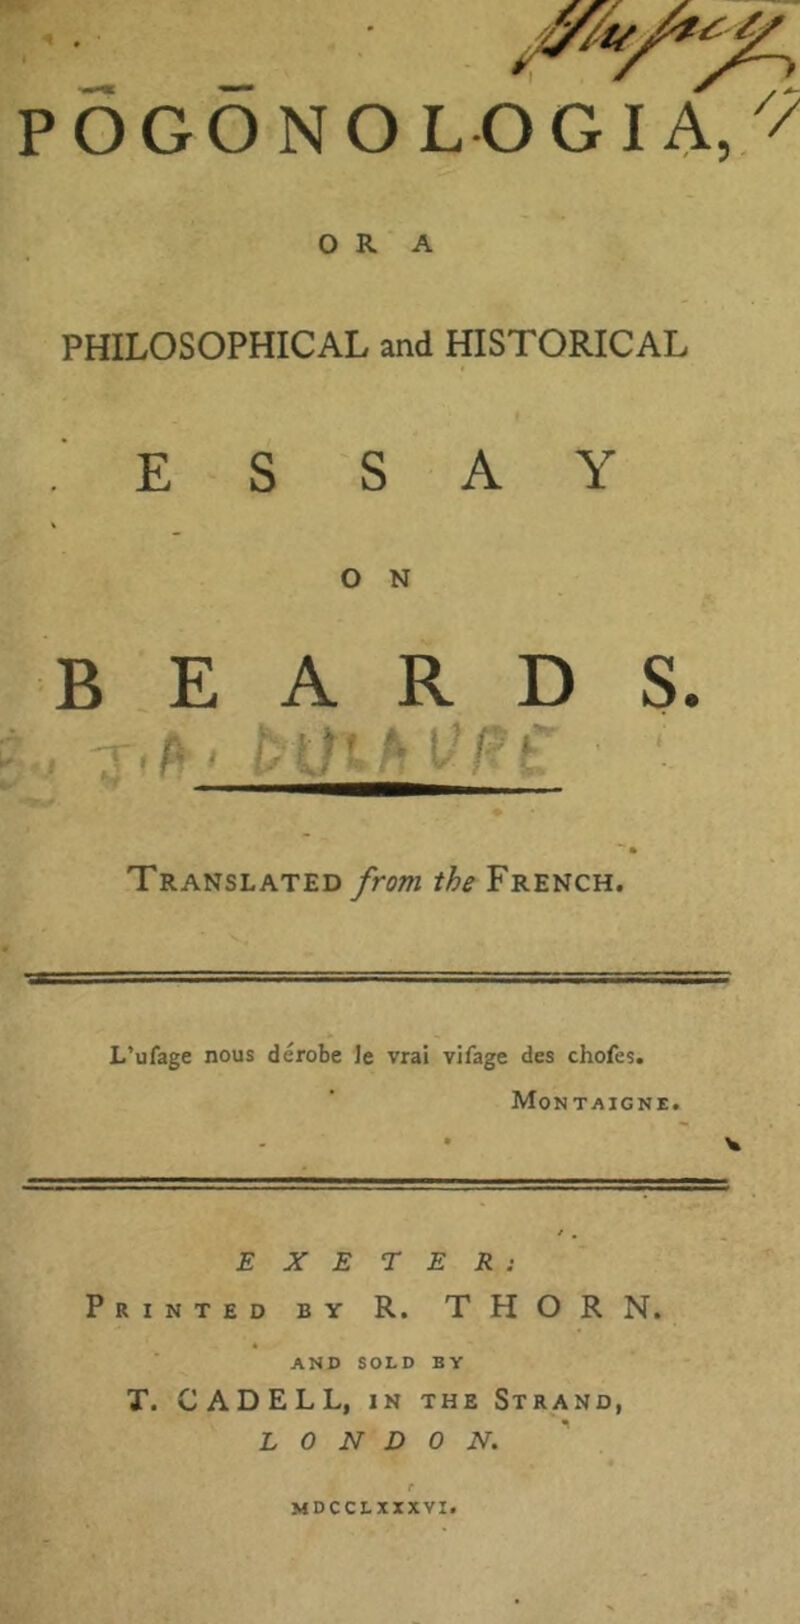 ' _ POGONOLOGI A,// ORA PHILOSOPHICAL and HISTORICAL E S SAY O N BEARDS. * ■*■ * Translated from the French. L’ufage nous derobe Je vral vifage des chofes. Montaigne. V E X E r E R : Printed by R. THORN. V ■ AND SOLD BY T. CADELL, IN THE Strand, LONDON.^ MDCCLXXXVI.